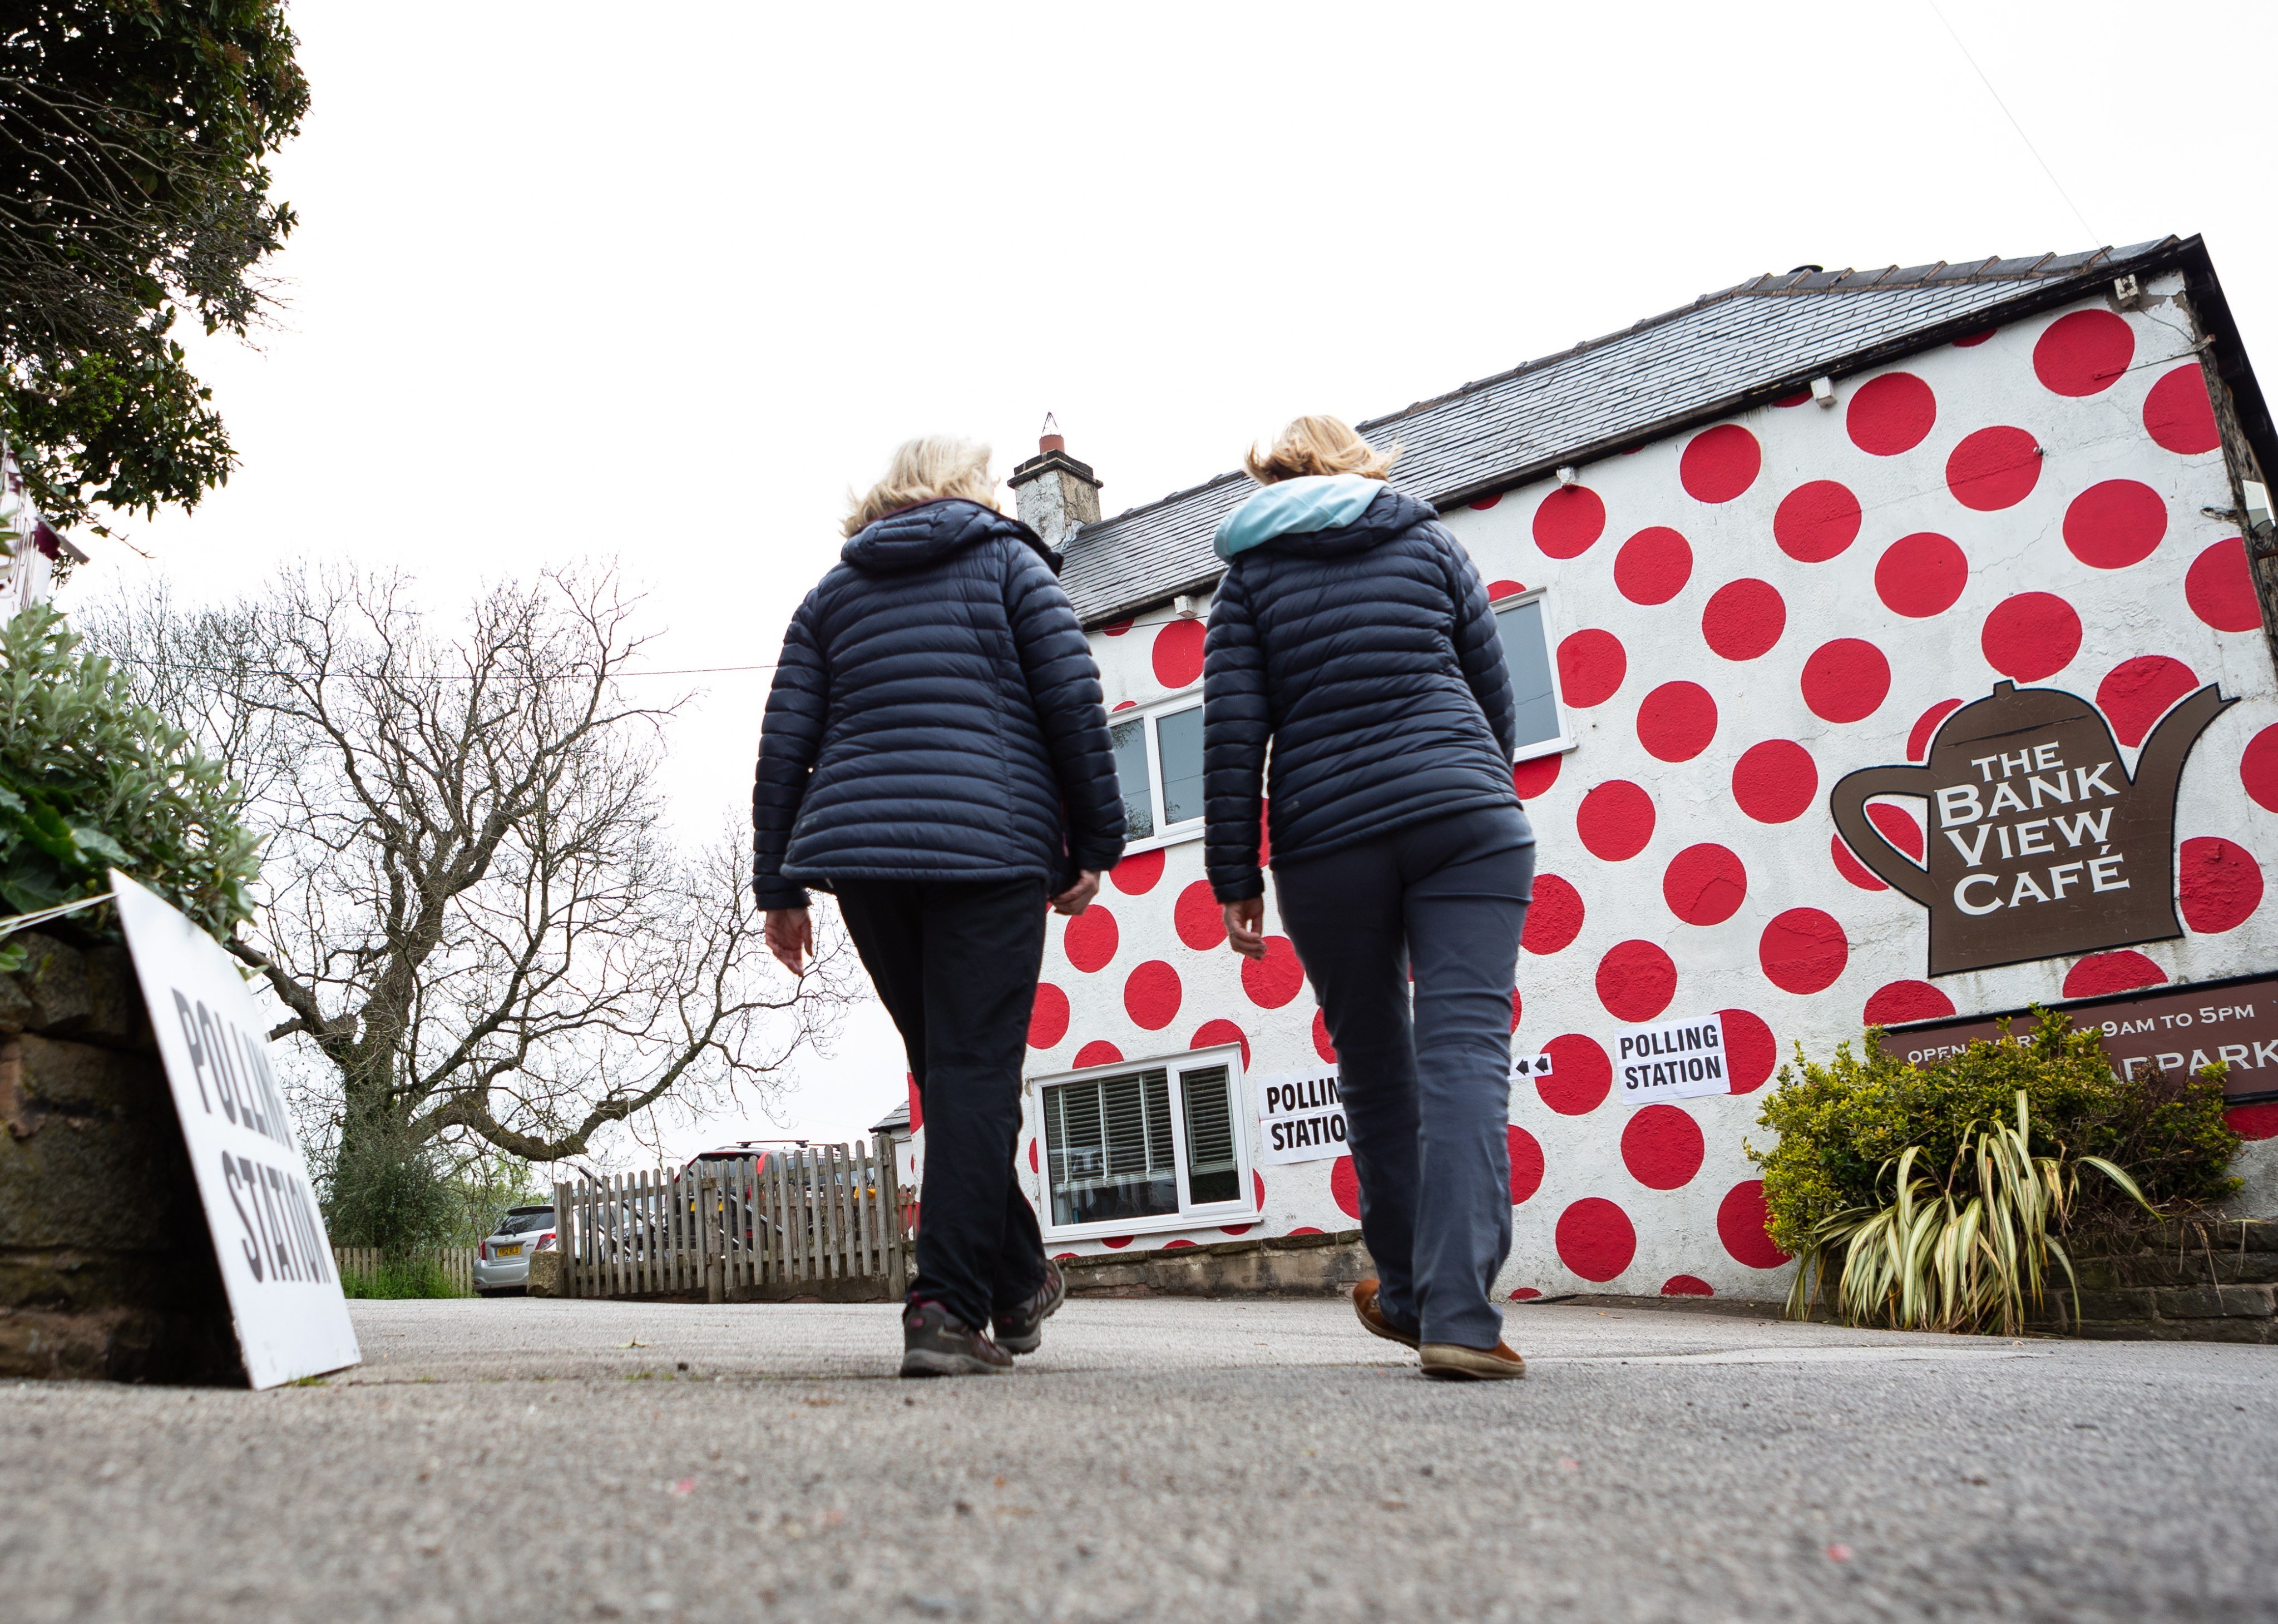 People arrive at a polling station at Langsett Barn in Sheffield, England, on May 4. The ruling Conservative Party lost more than 1,000 seats in a series of local elections, the latest blow to a party that has struggled to manage a cost-of-living crisis and surging energy prices. Photo: EPA-EFE